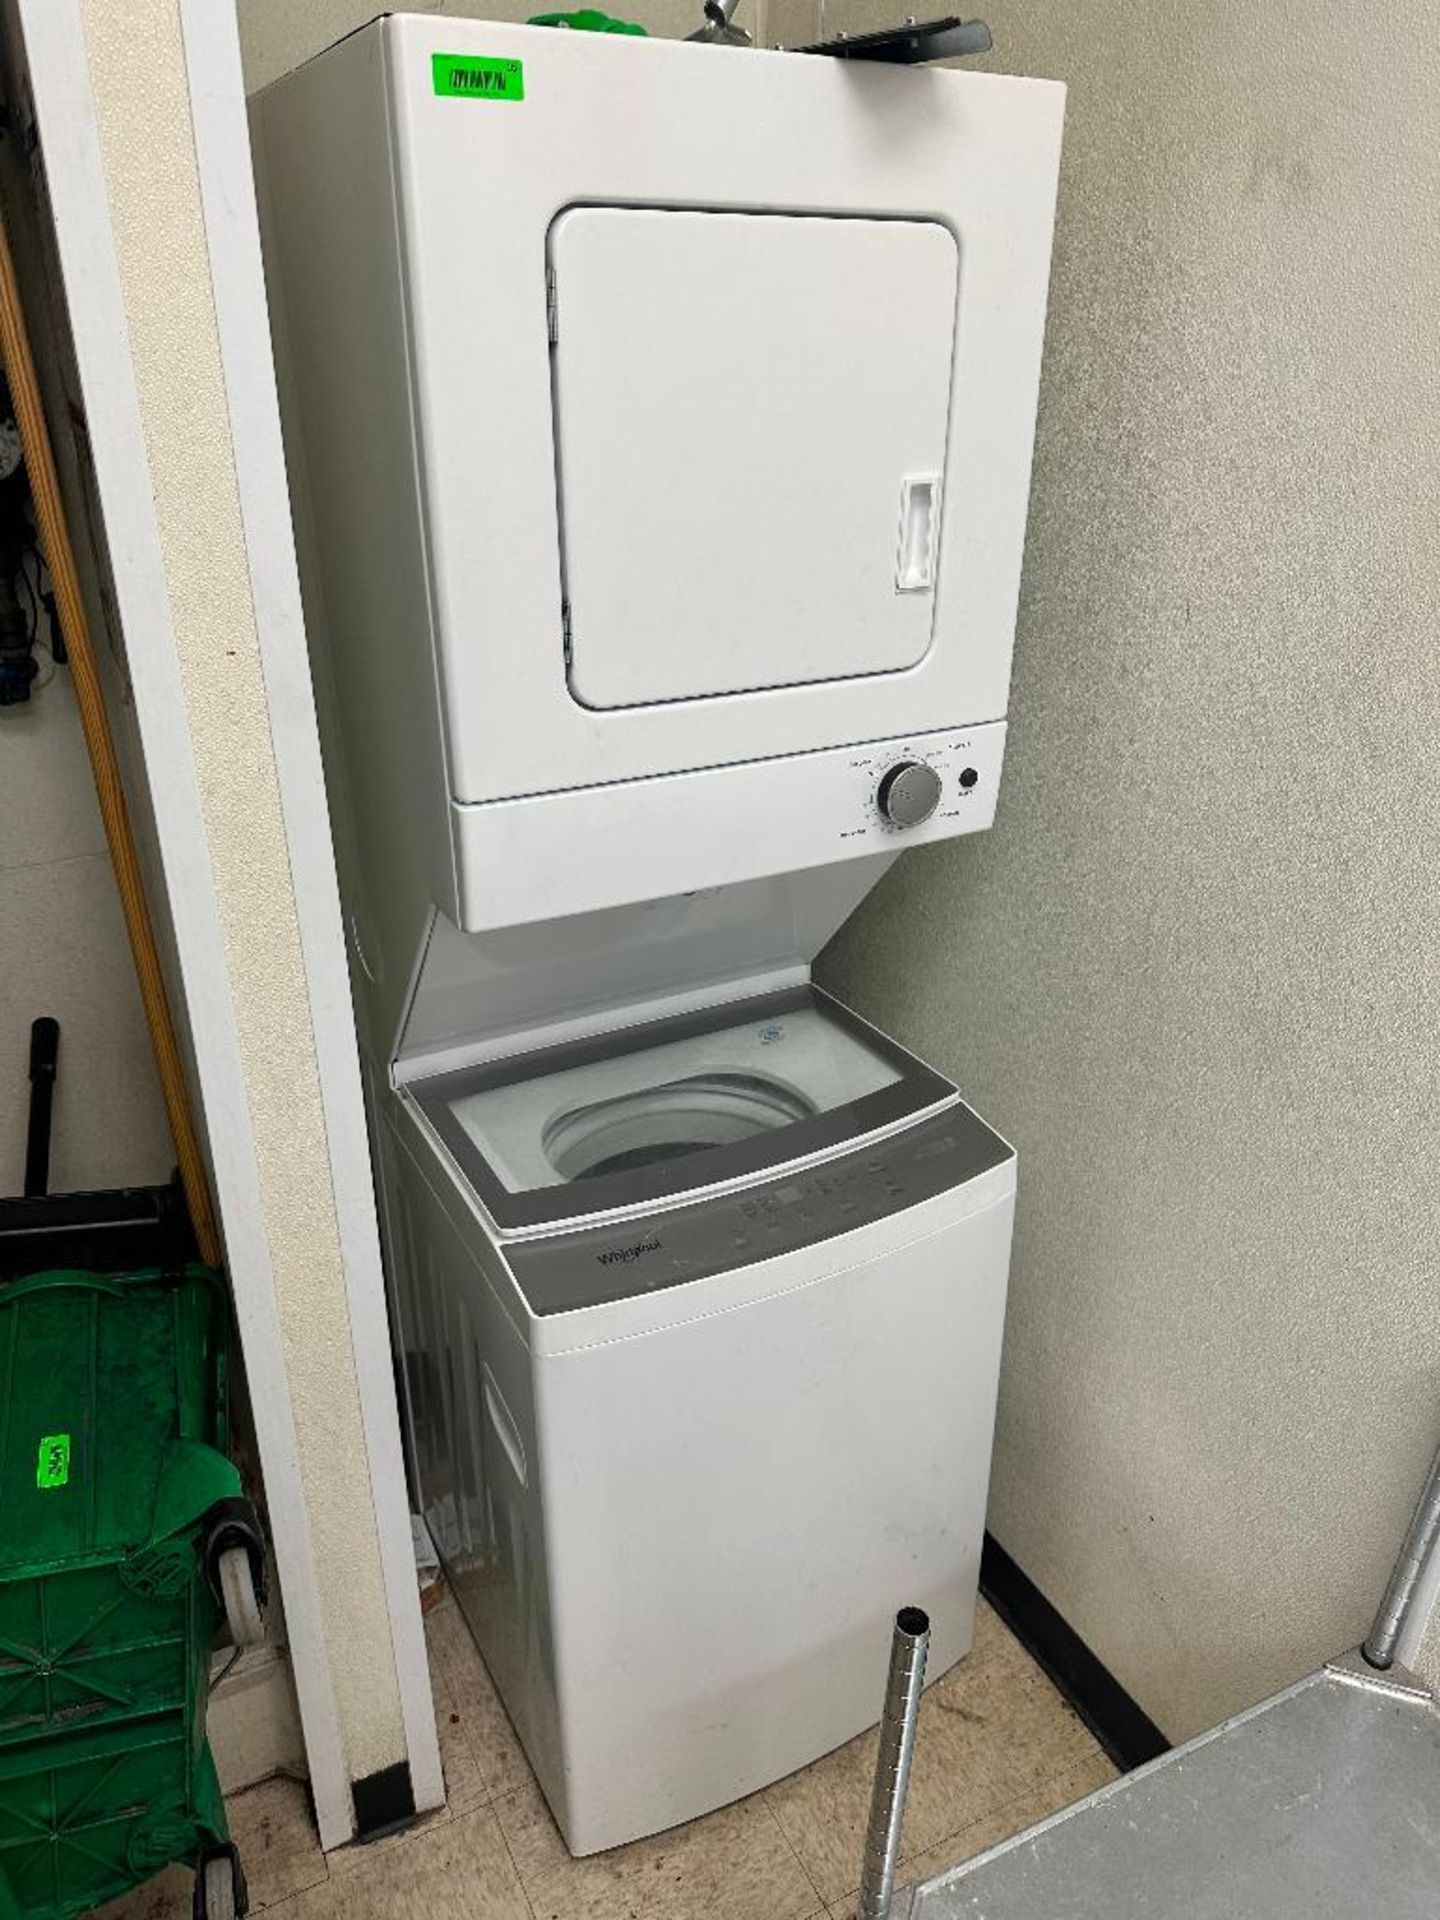 DESCRIPTION WHIRLPOOL WASHER AND DRYER ALL IN ONE BRAND / MODEL: WHIRLPOOL LOCATION �5017 Teasley La